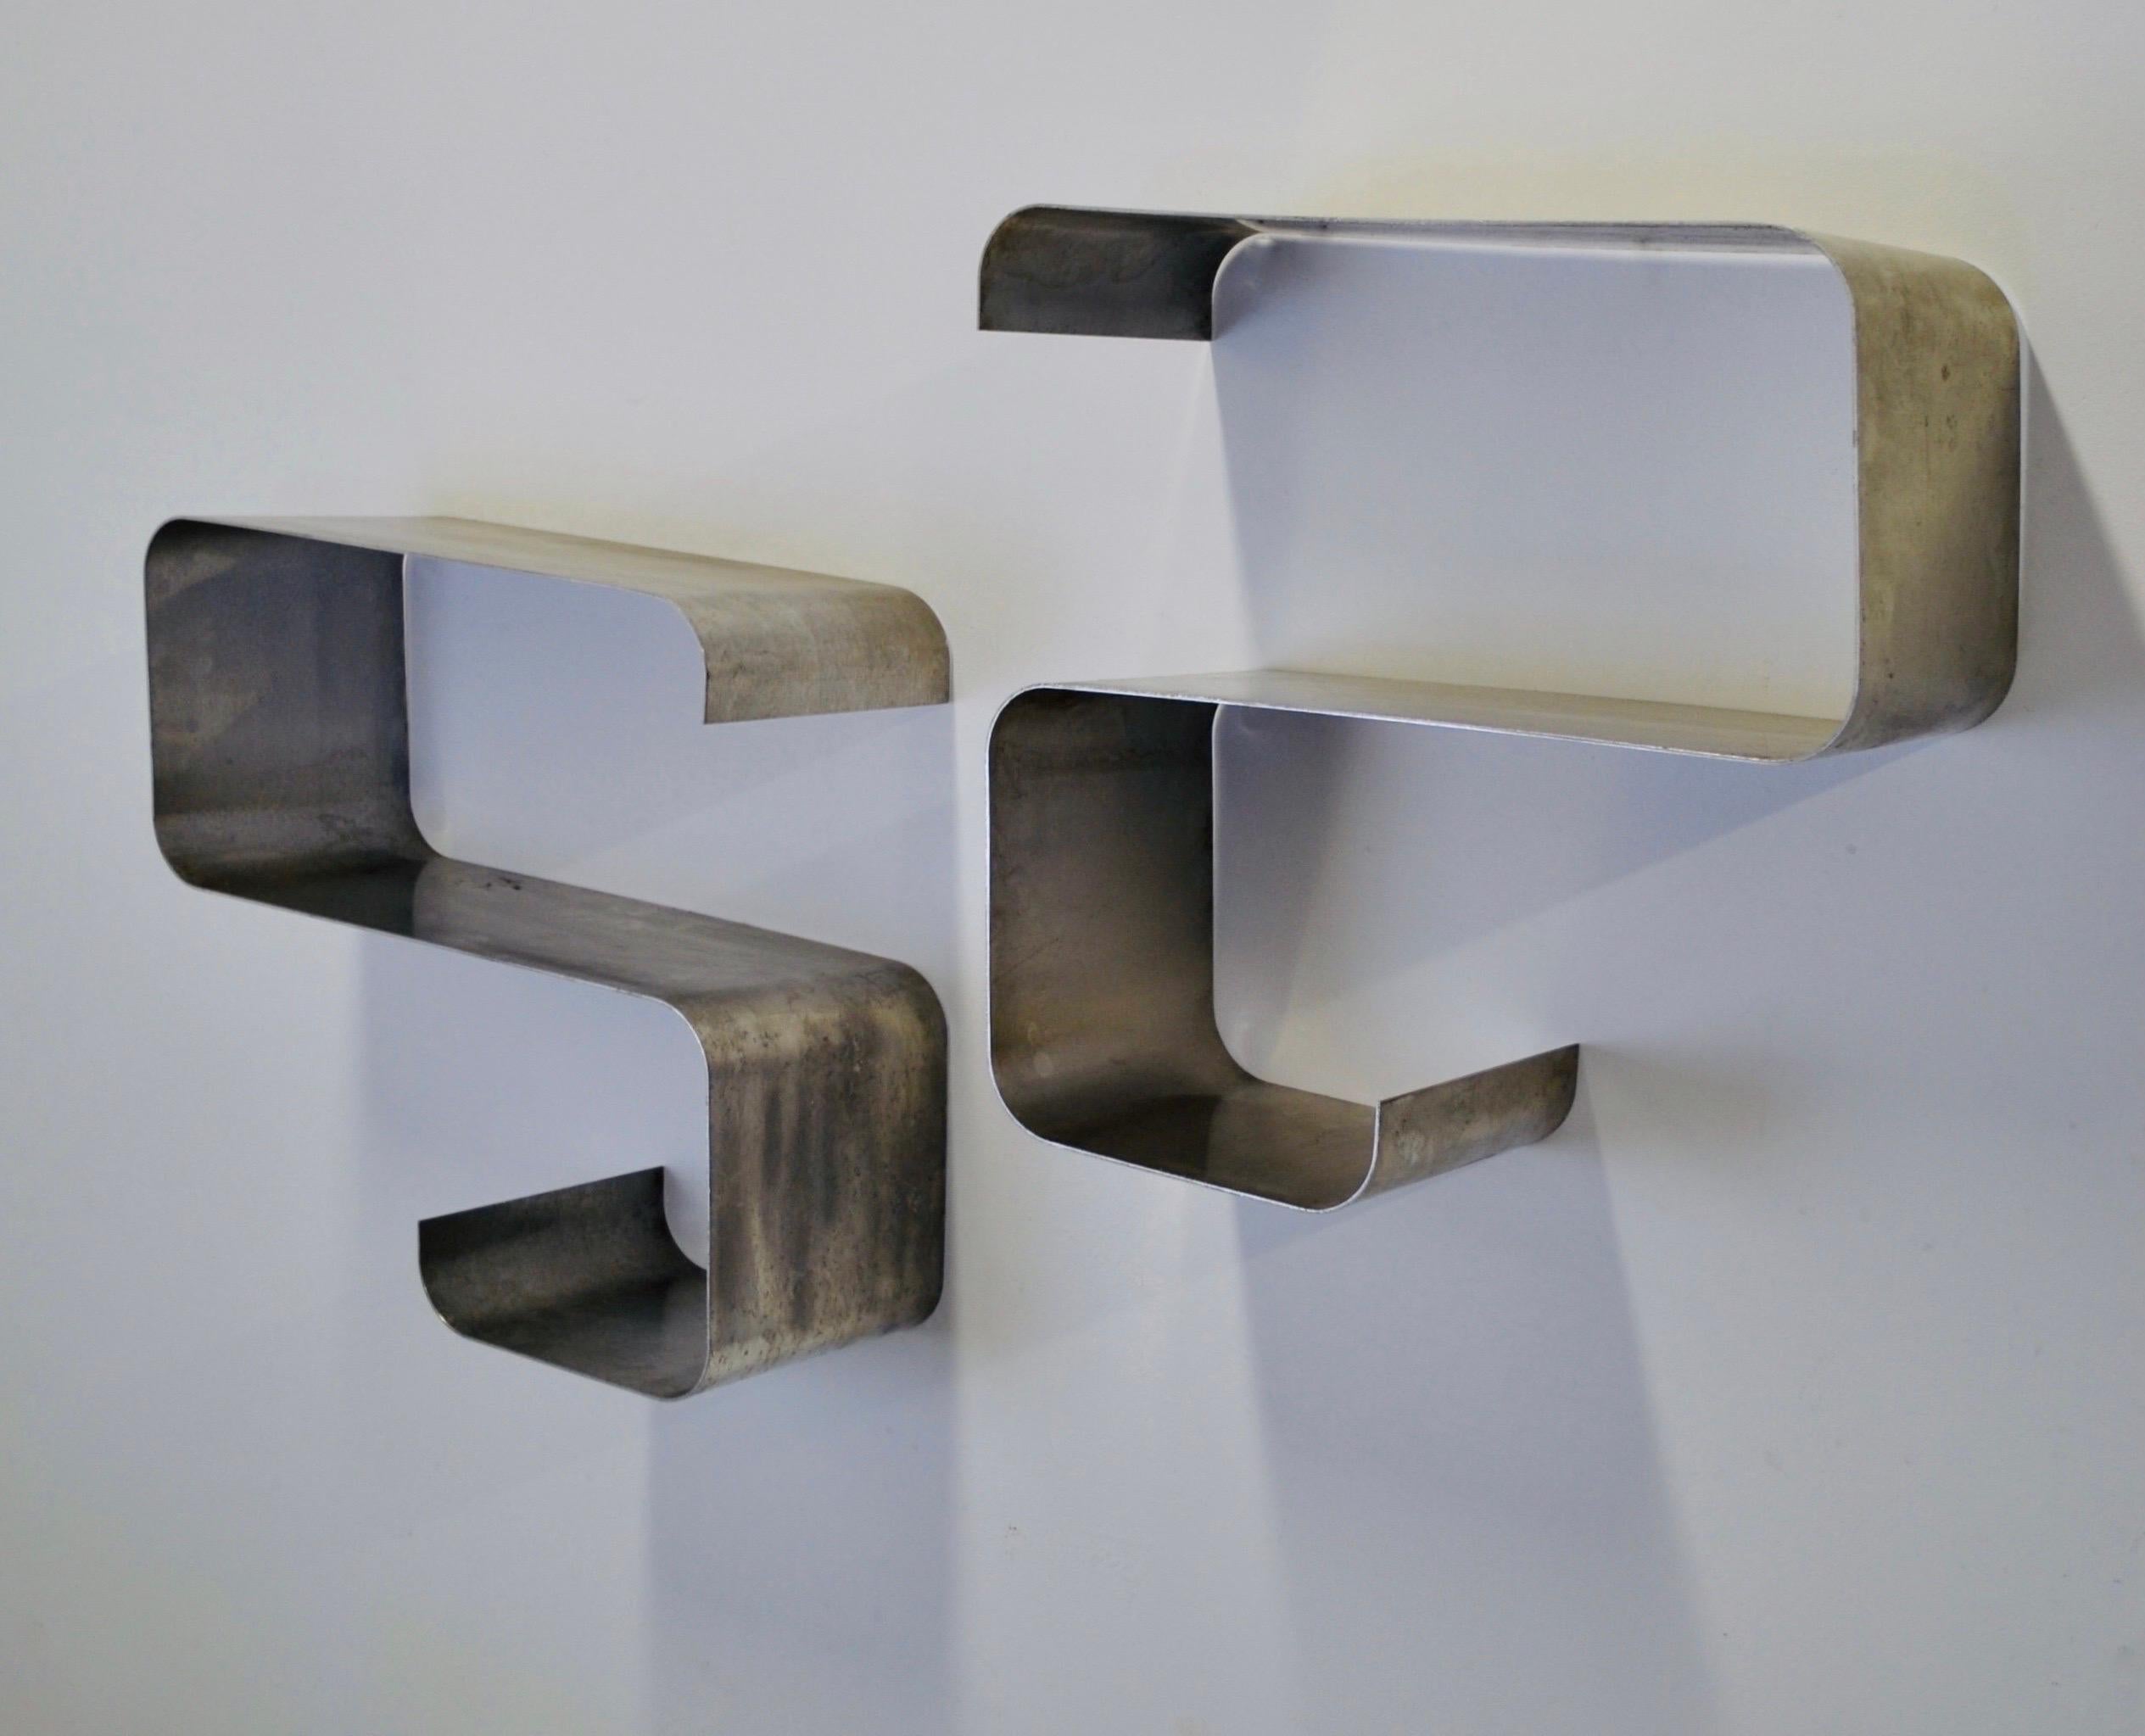 A pair of S-shaped stainless steel shelves 